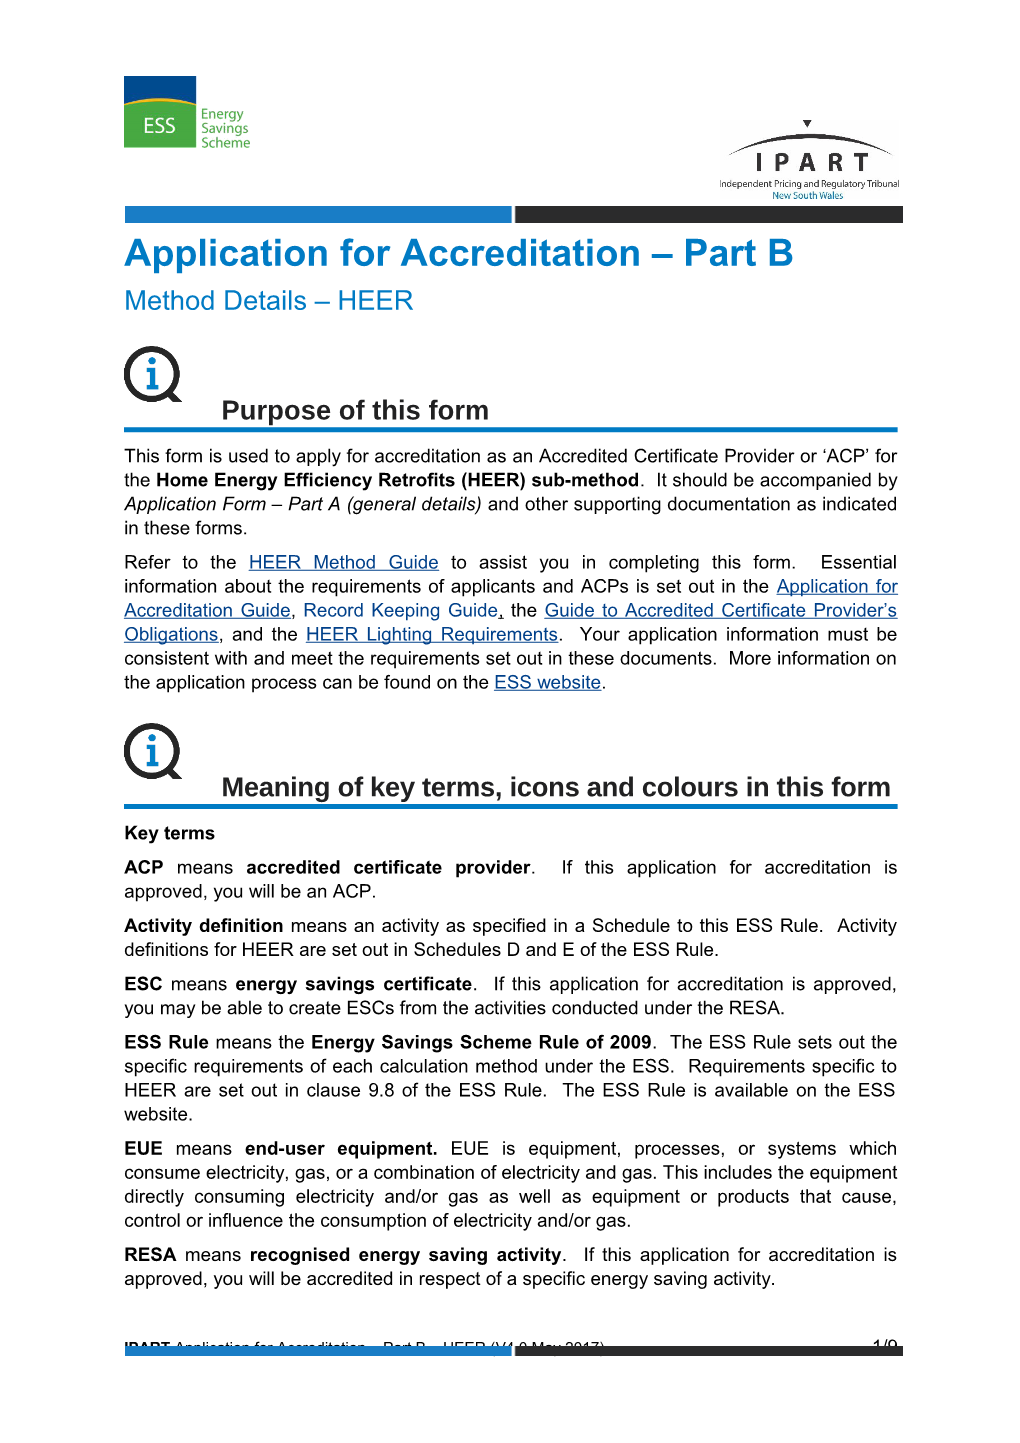 Application for Accreditation Part B